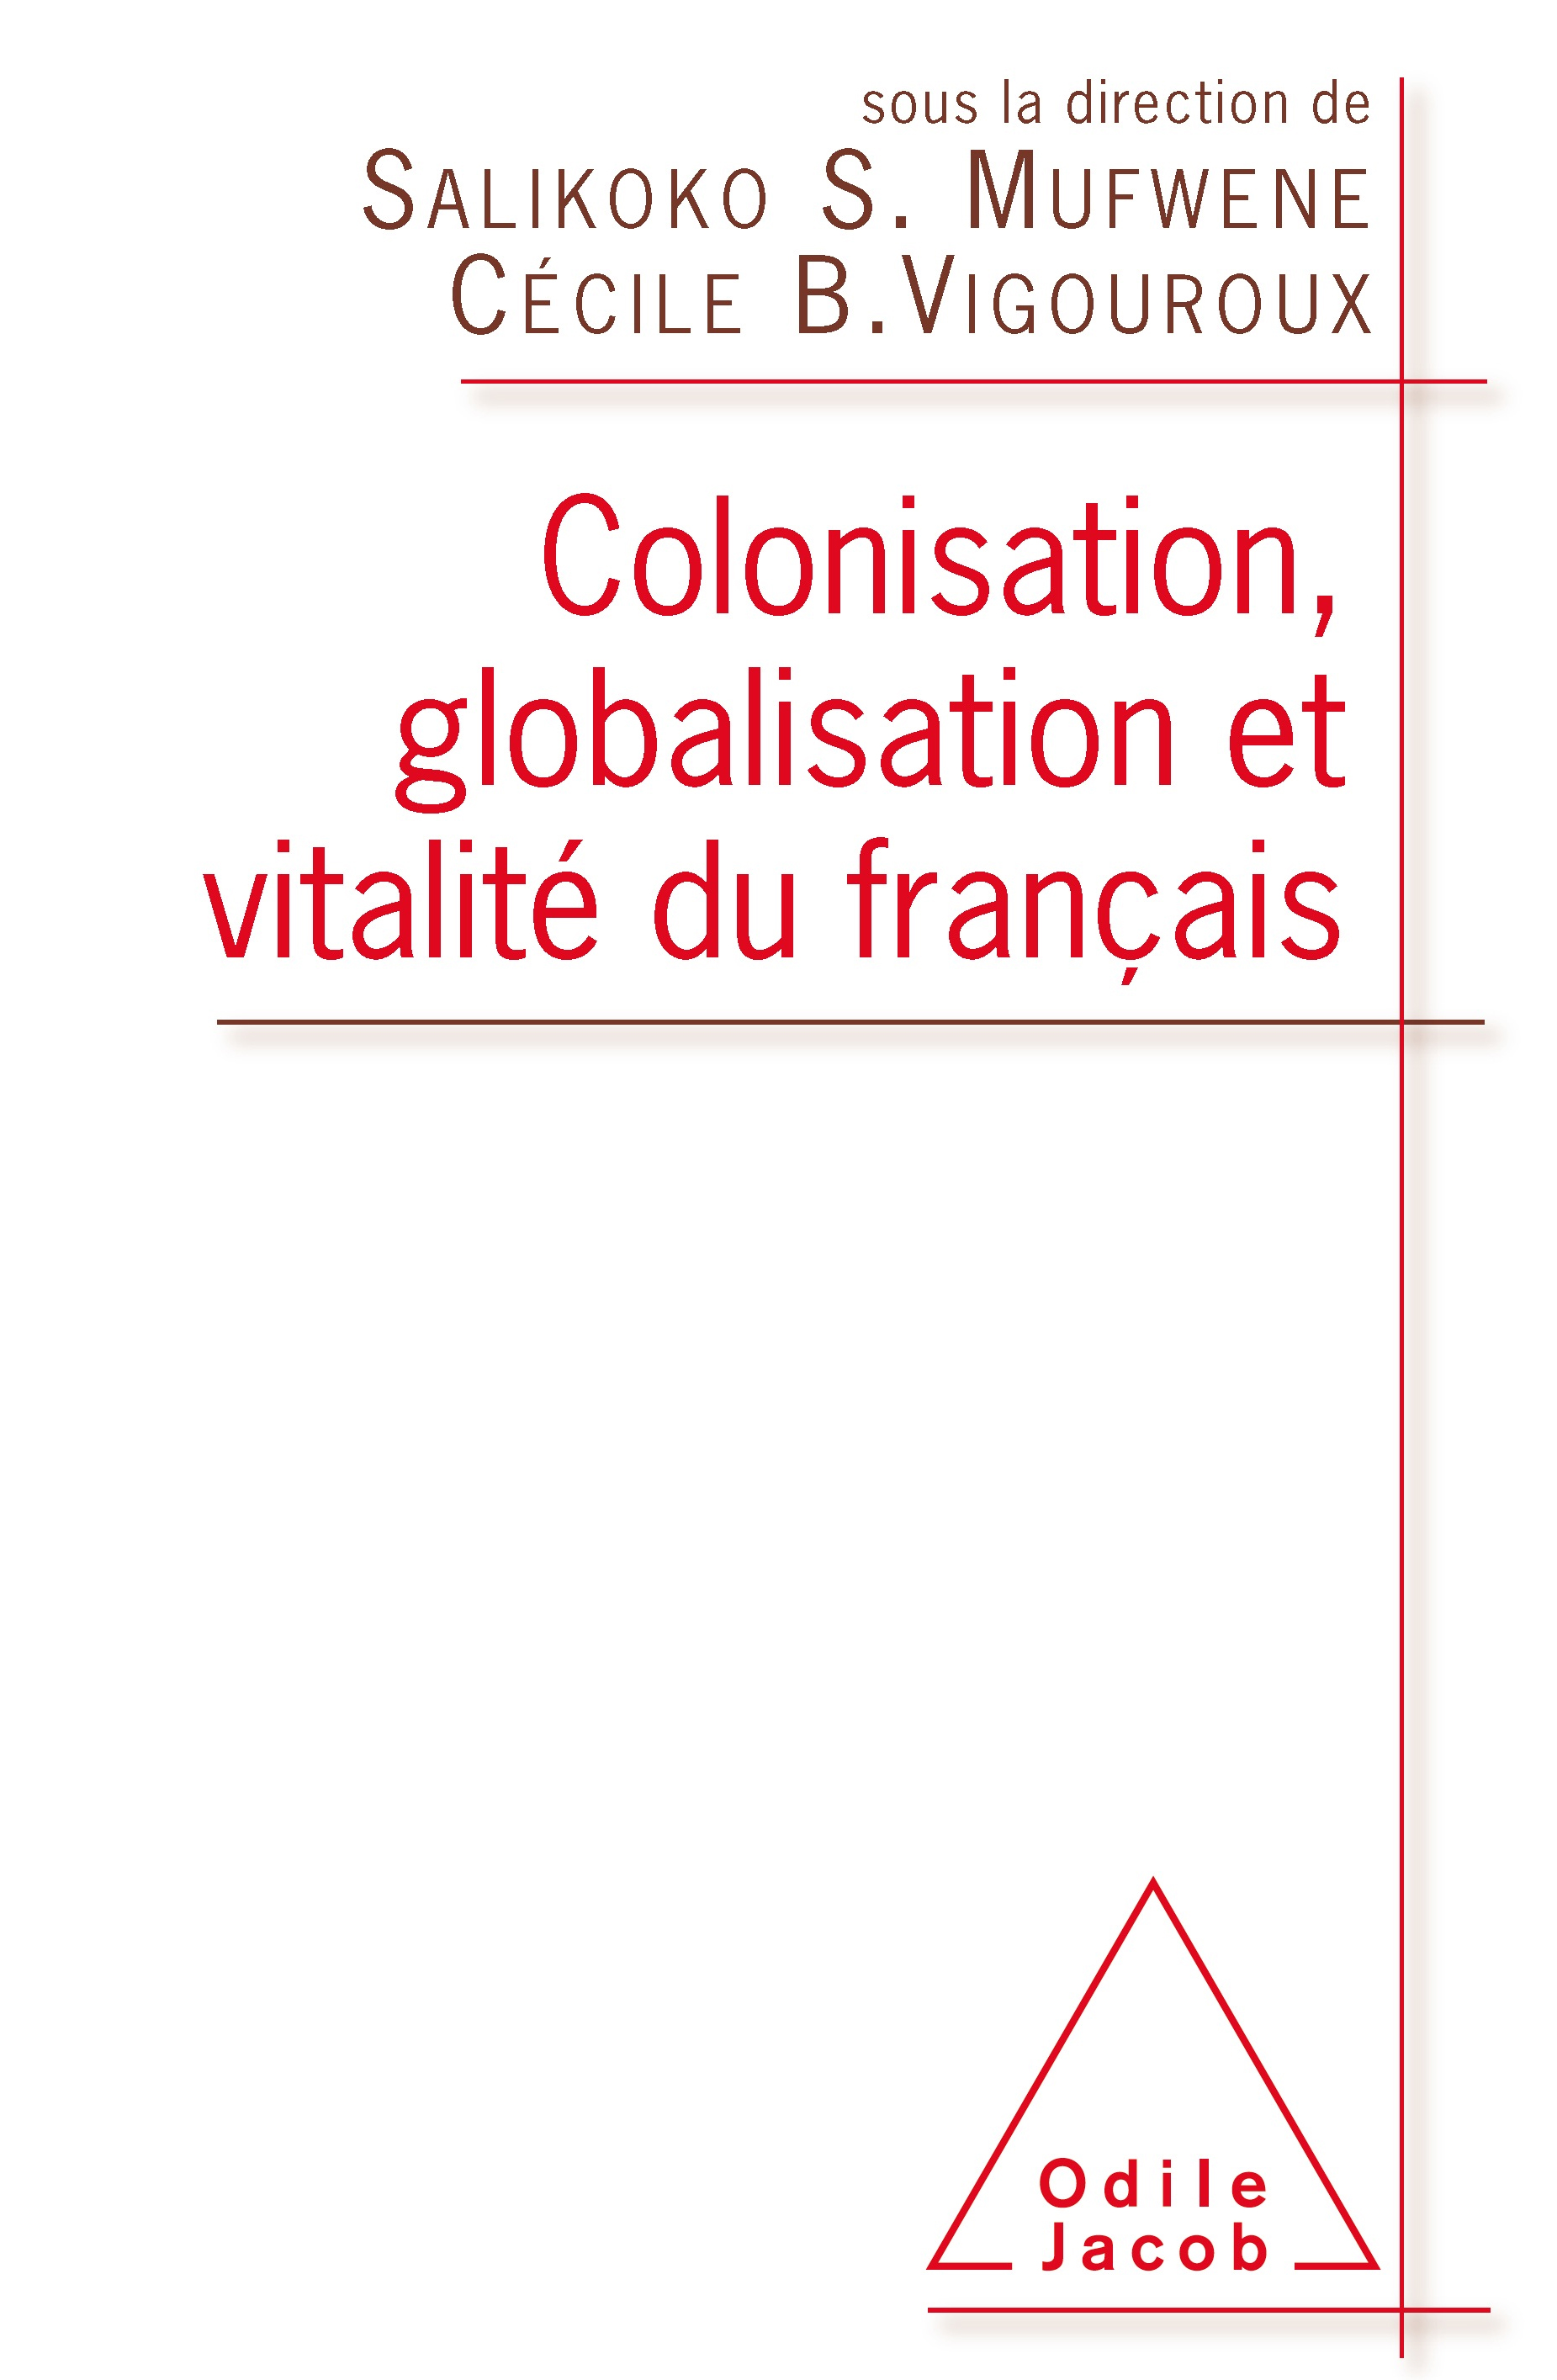 Colonisation, Globalisation and the Dynamism of the French Language